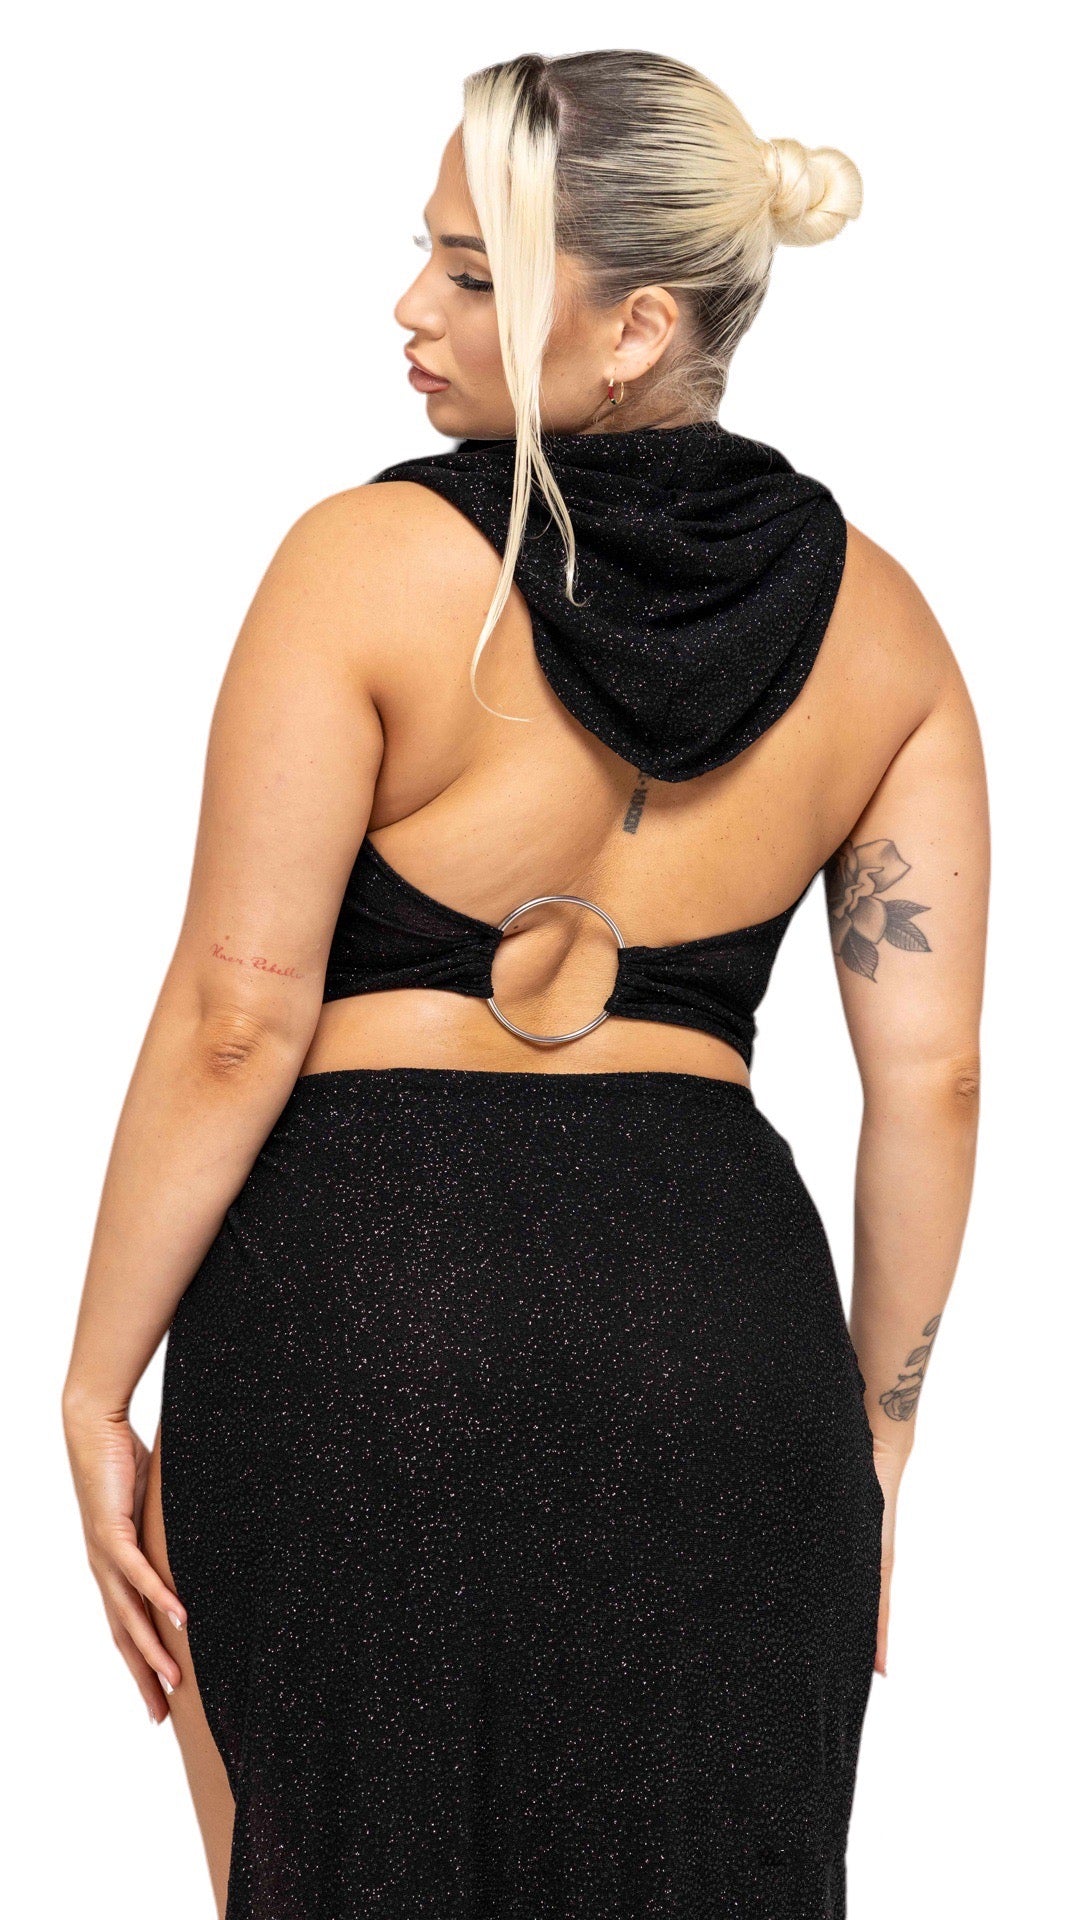 BADGAL ONLINE COWL SEXY HOODIE -Made from a a soft black glittery jersey fabric